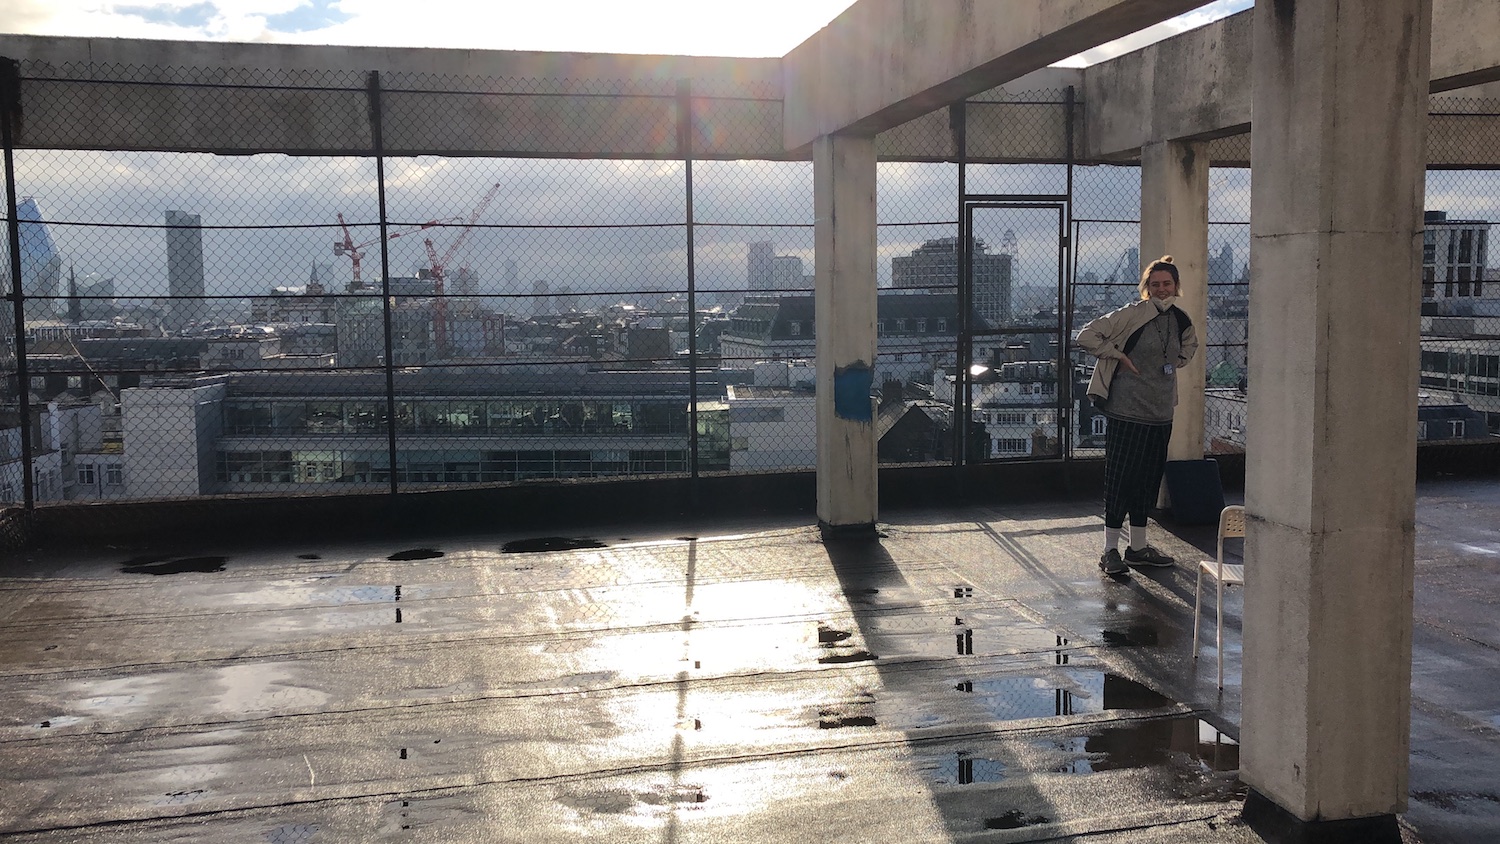 agnes standing on a roof overlooking the city of london